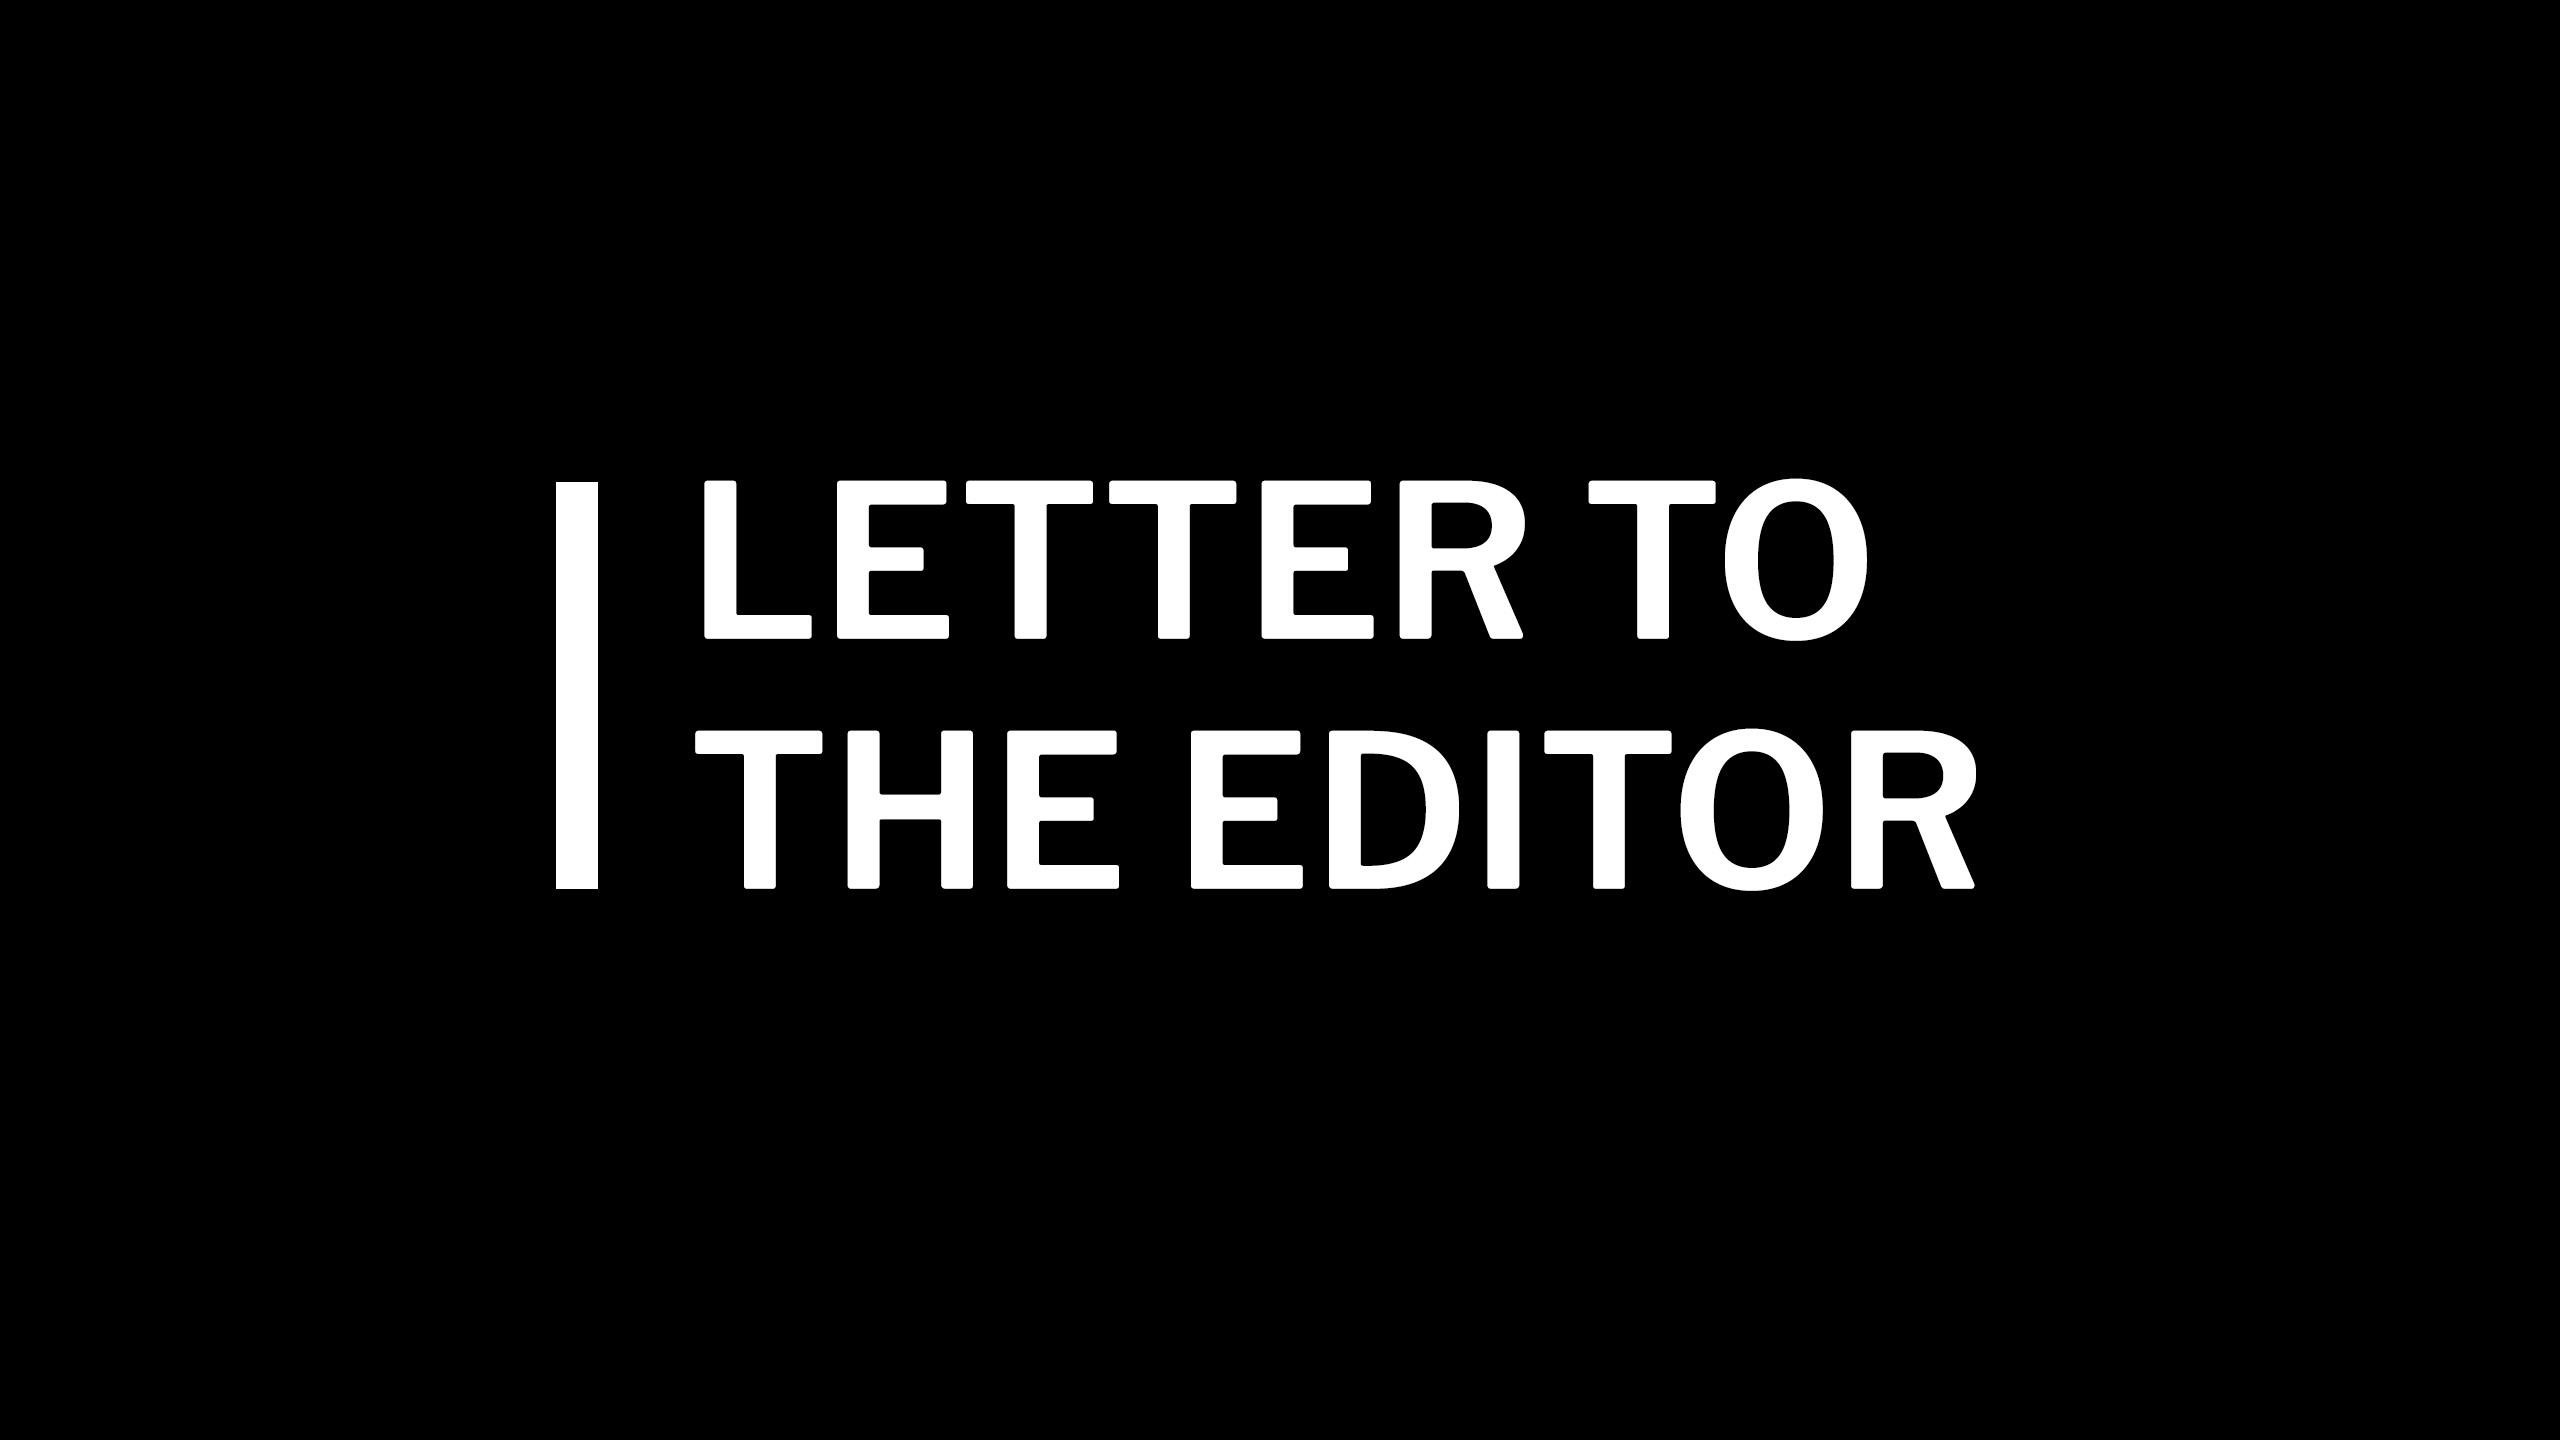 A black background with white text that says "Letter to the Editor."